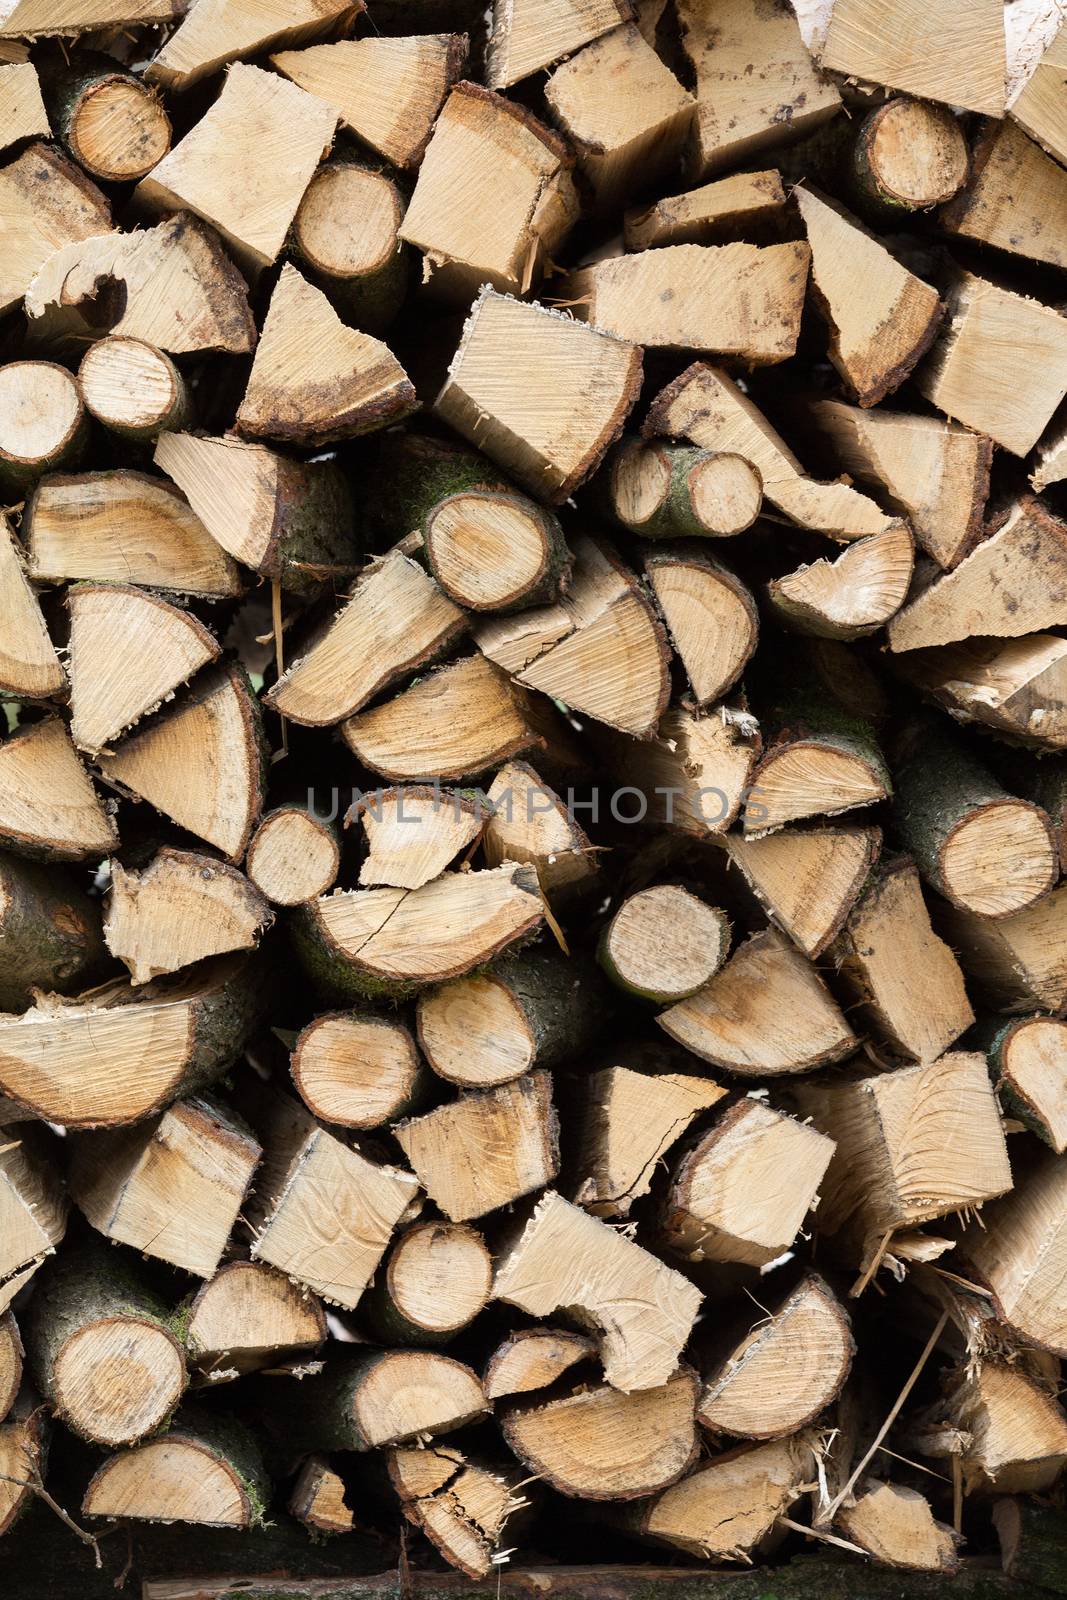 Pile of Wood by Kartouchken